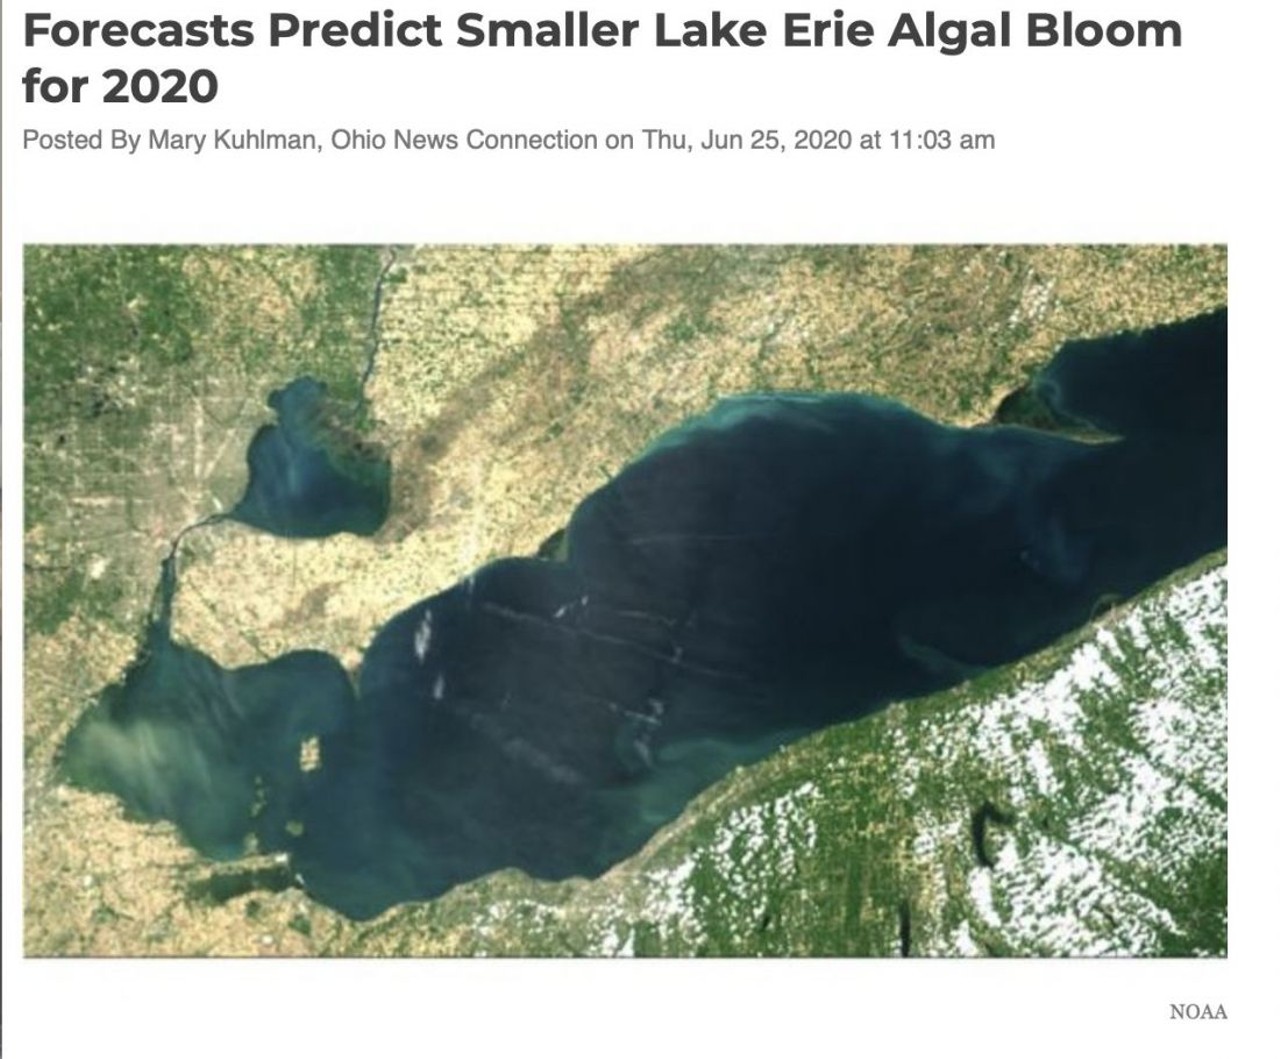  &#147;Forecasts Predict Smaller Lake Erie Algal Bloom for 2020&#148;
June 25th
&#147;"It's probably going to affect the areas that are affected no matter what. So, that's going to be through that Maumee Bay area," Johnson says. "But we don't expect it will have nearly the extent as what we saw in 2015, when it was taking up the whole Western Basin.&#146;&#148;
Photo via Scene Archives